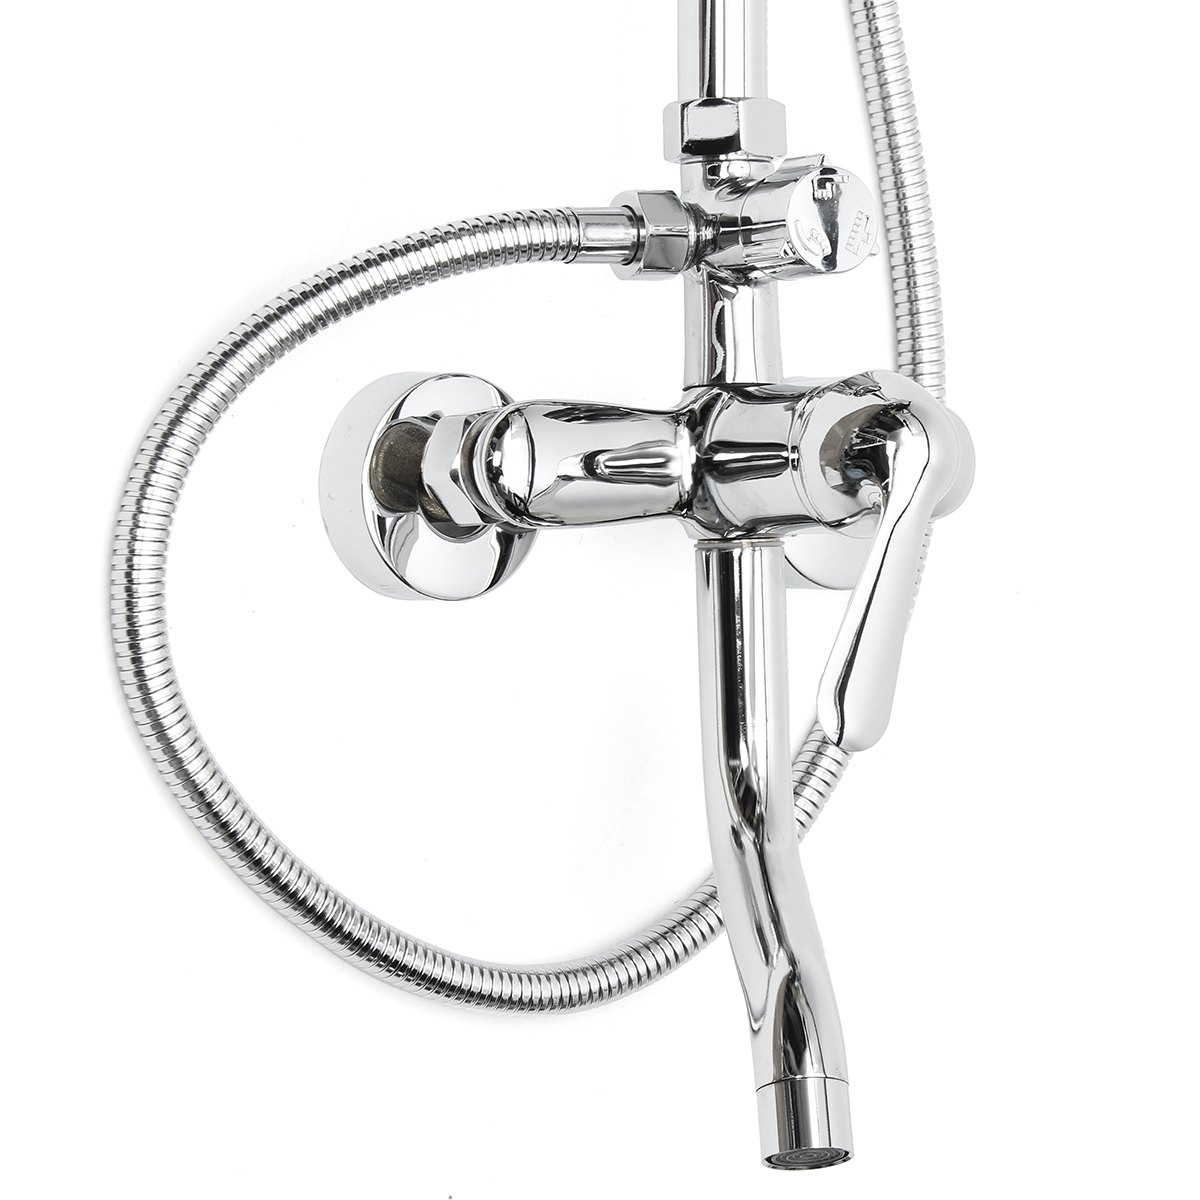 Chrome-Brass-Shower-Head-Set-Supercharged-Hot-Cold-Shower-Faucet-with-Hand-Shower-Tub-Mixer-Tap-1255807